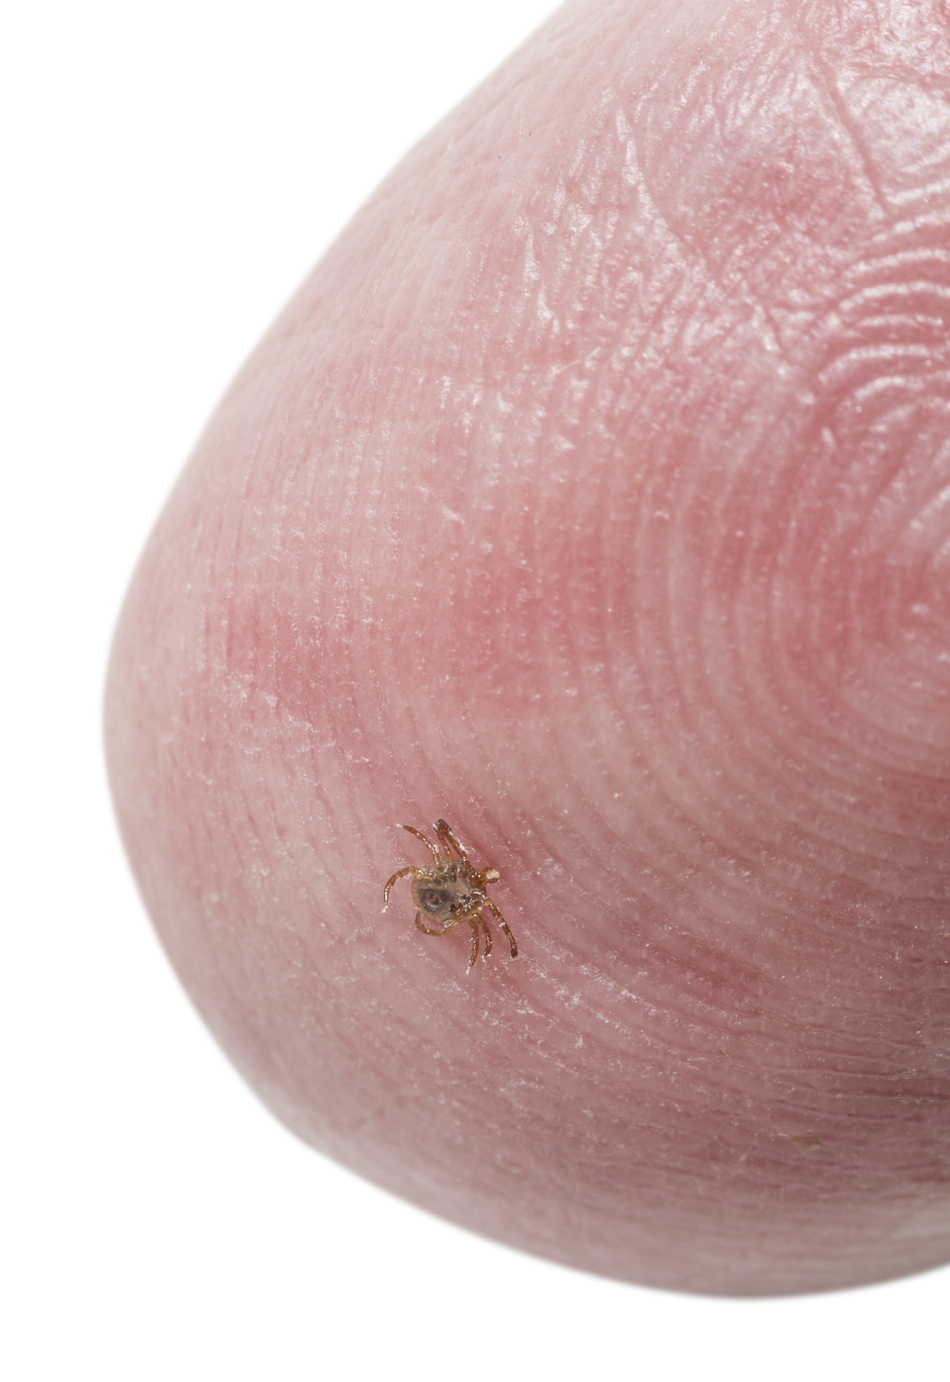 Do I Need to Go to the ER to Remove a Tick?